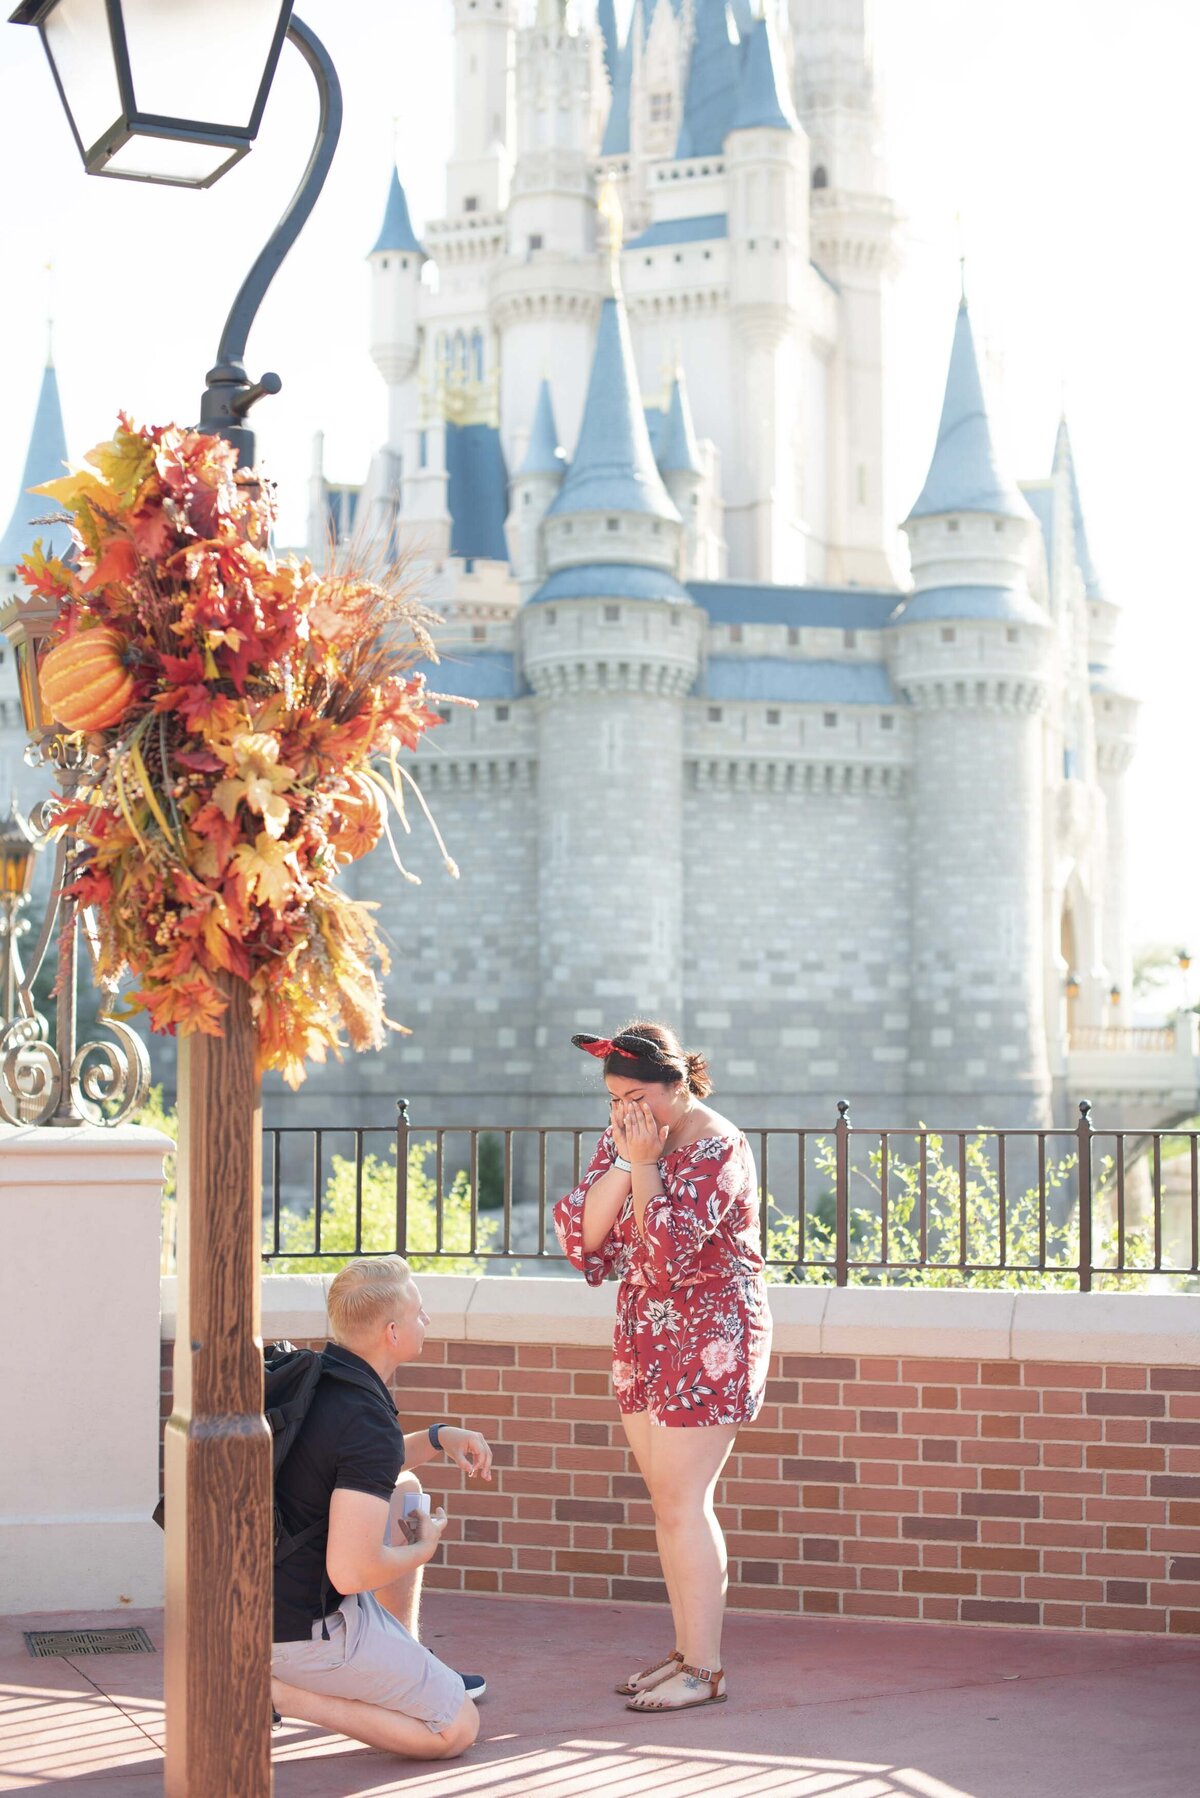 Surprise proposal at Disney World photographed by Schwalbs Photography